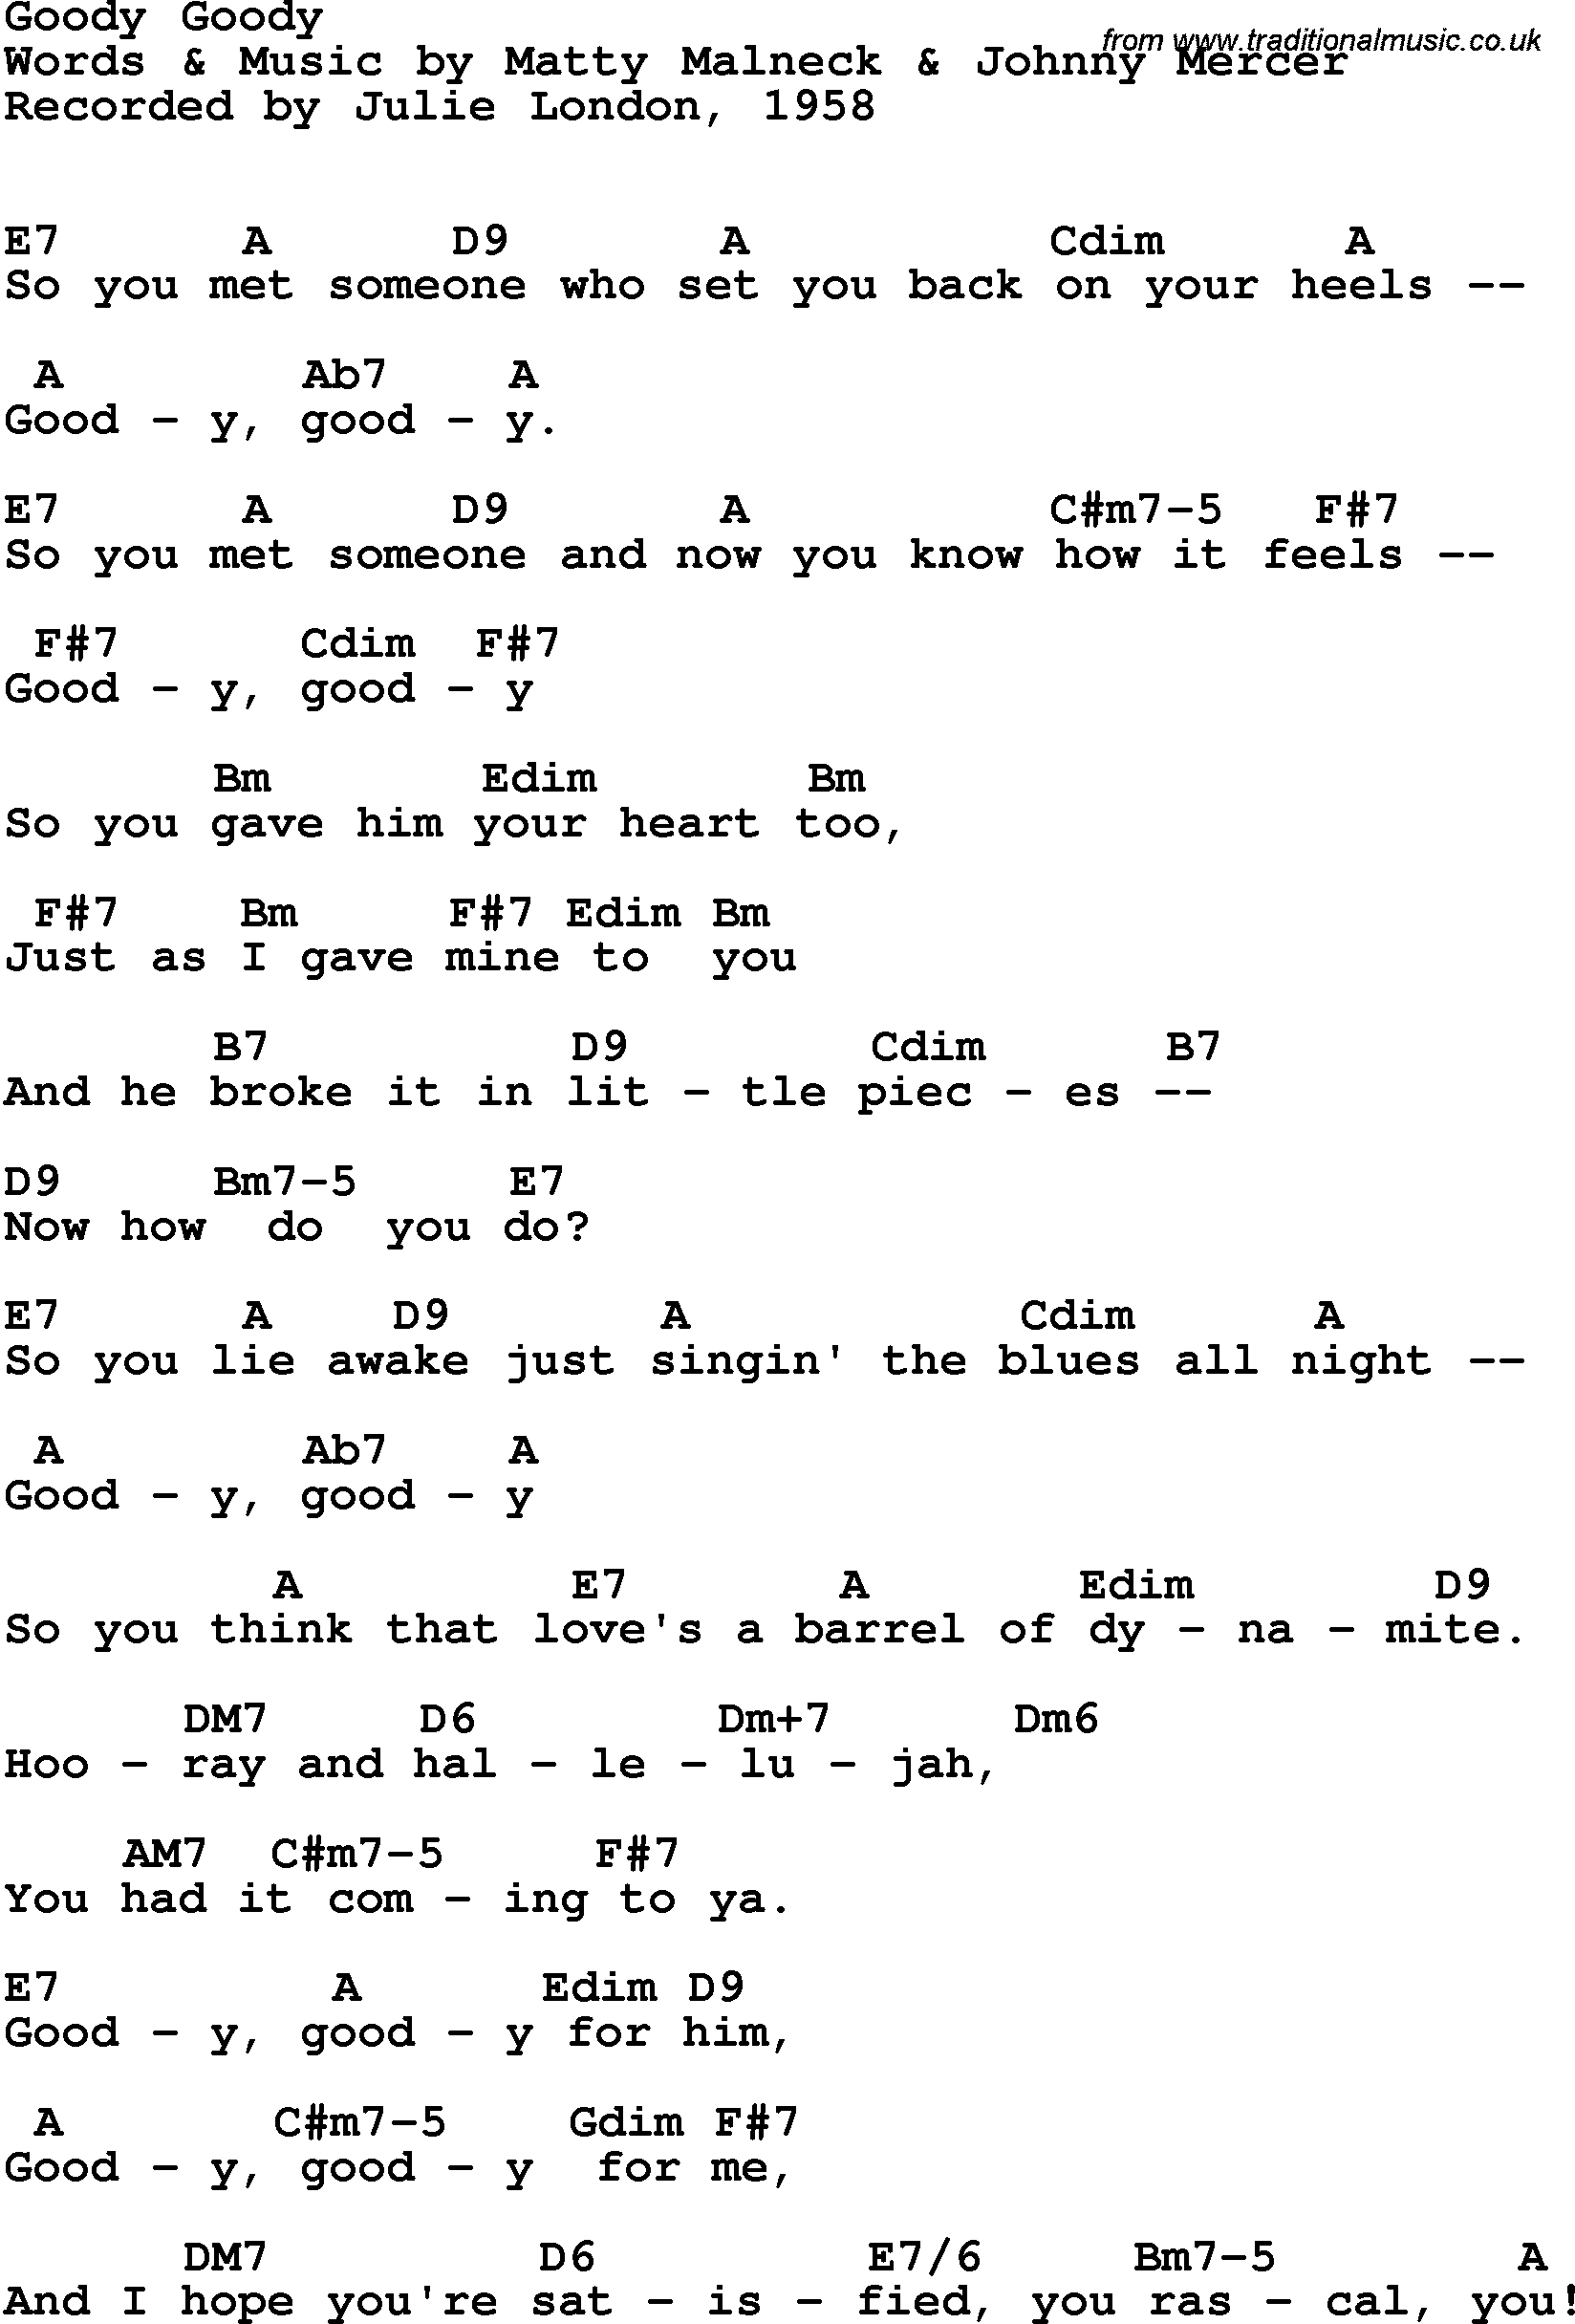 Song Lyrics with guitar chords for Goody Goody - Julie London, 1958